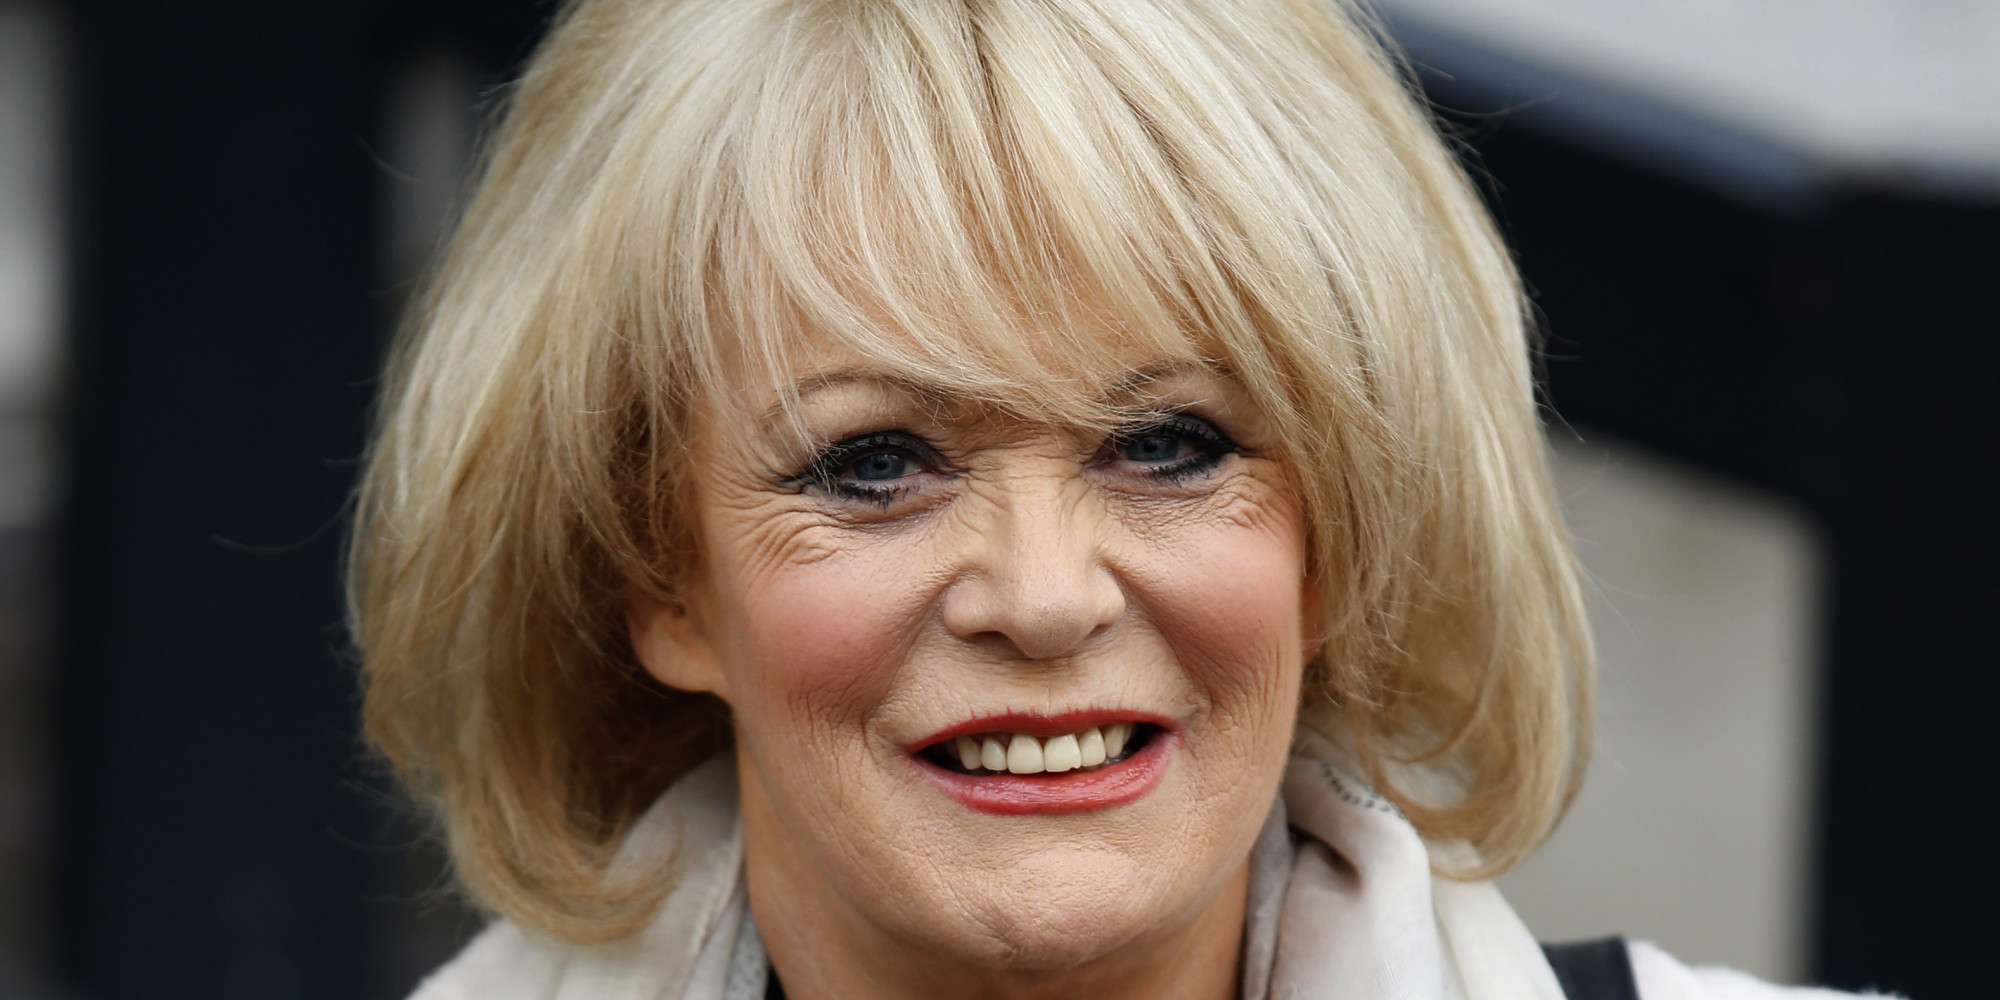 'Celebrity Big Brother' 2015: Loose Women's Sherrie Hewson Signs Up For New Series ...